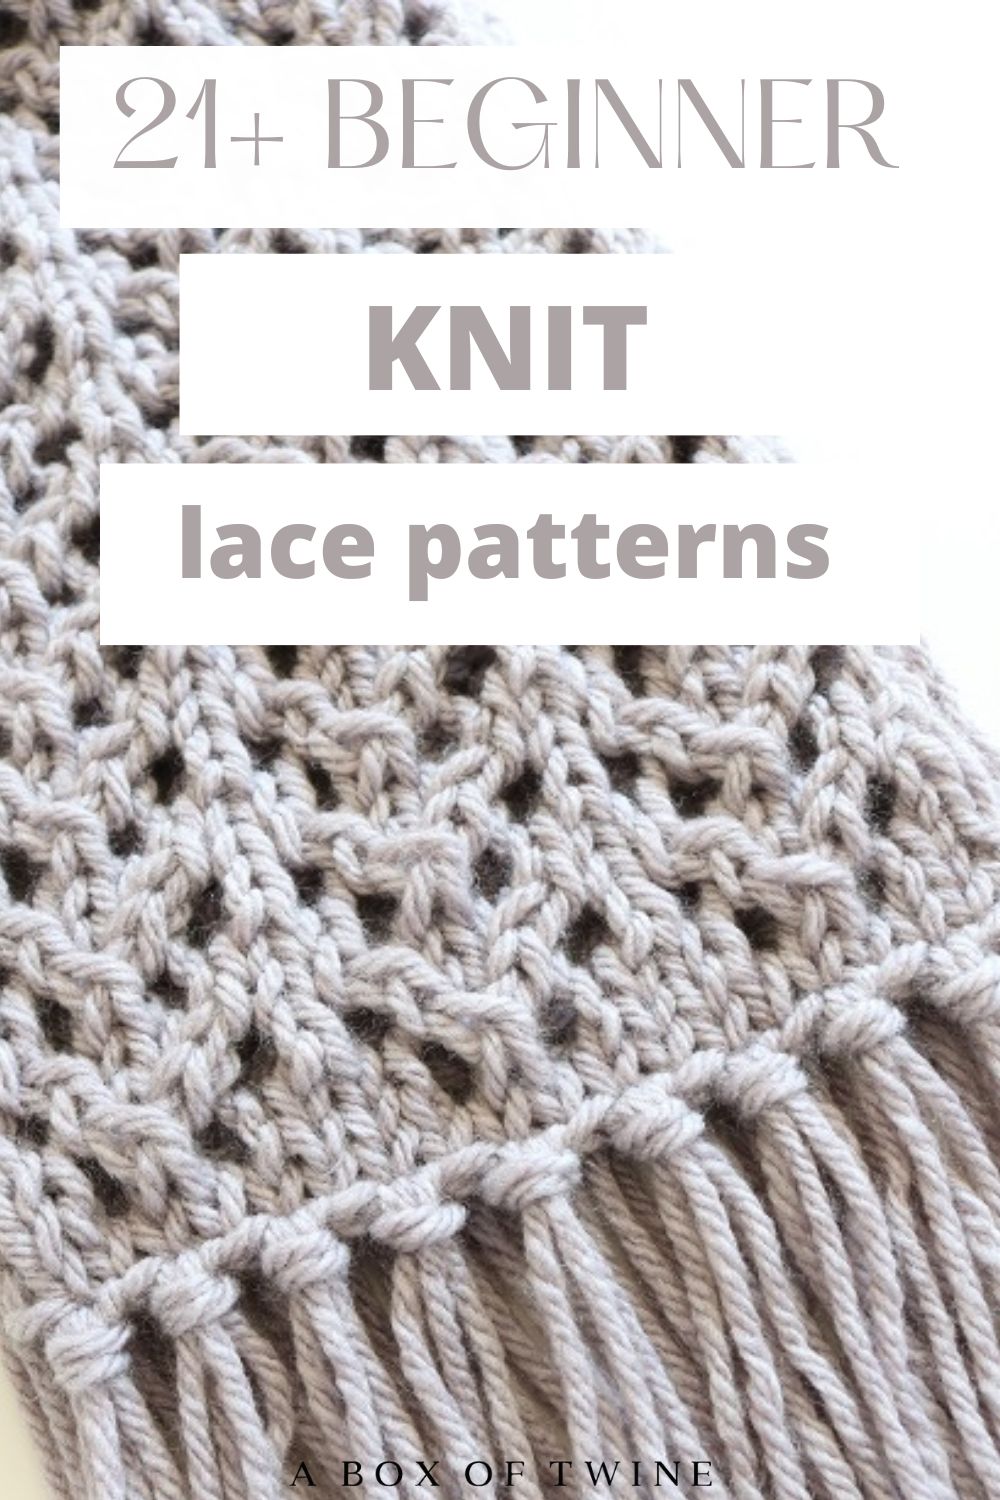 crochet lace patterns for beginners